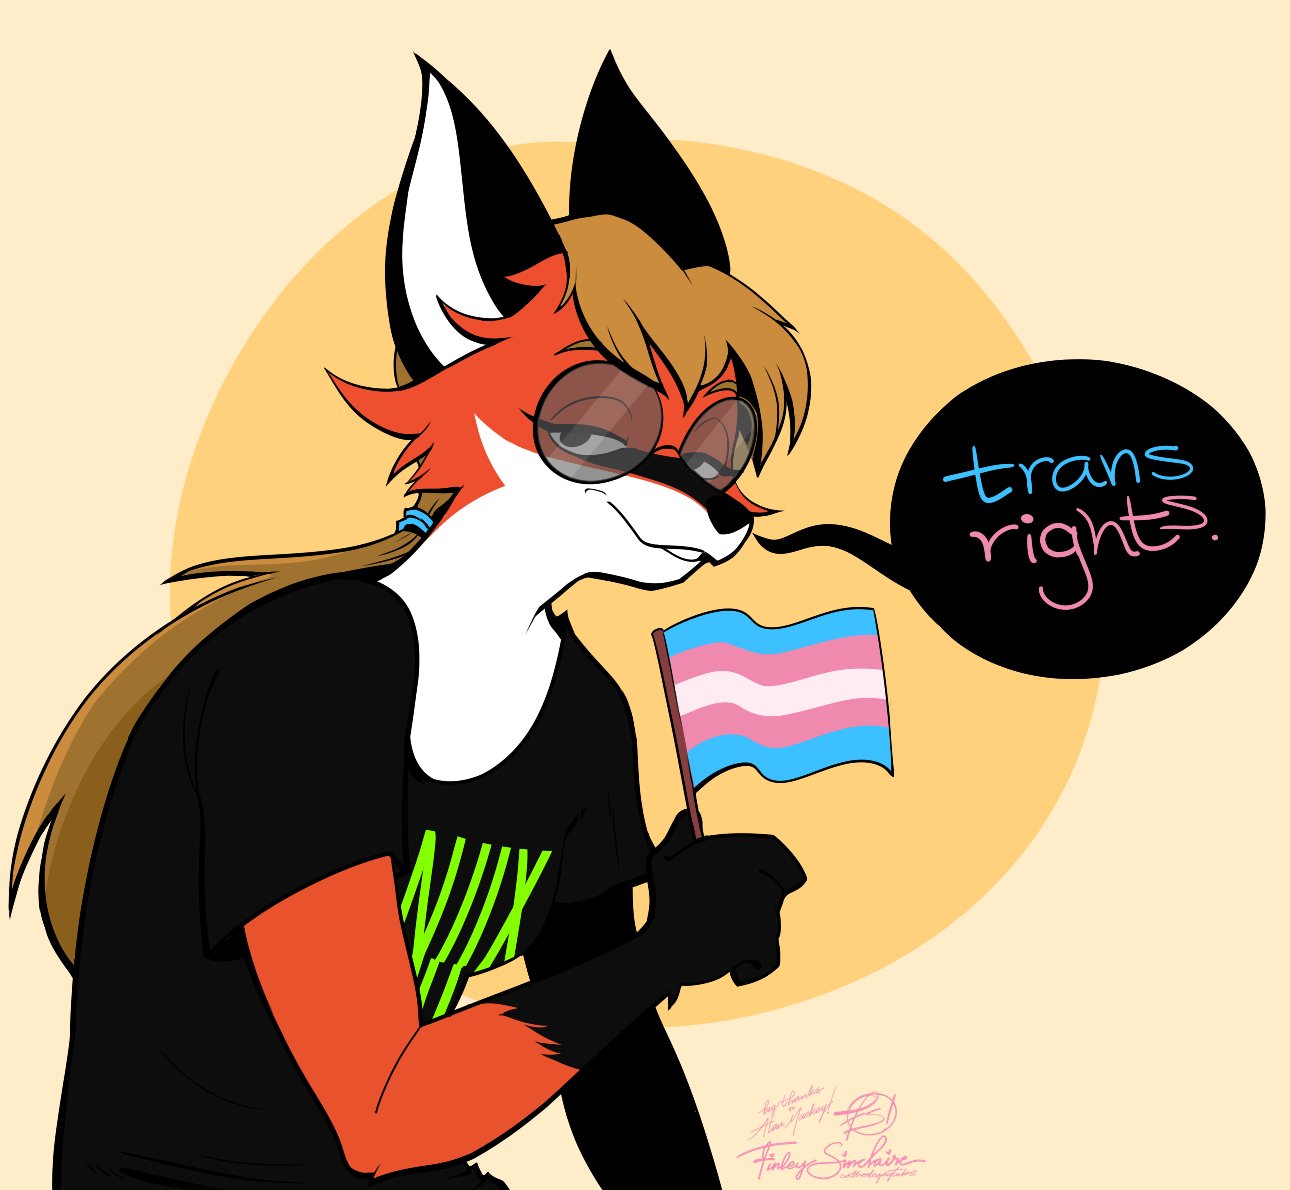 xenia the fox, the unofficial official linux mascot, holding up a trans flag and saying 'trans rights.' drawn by @cathodegaytube